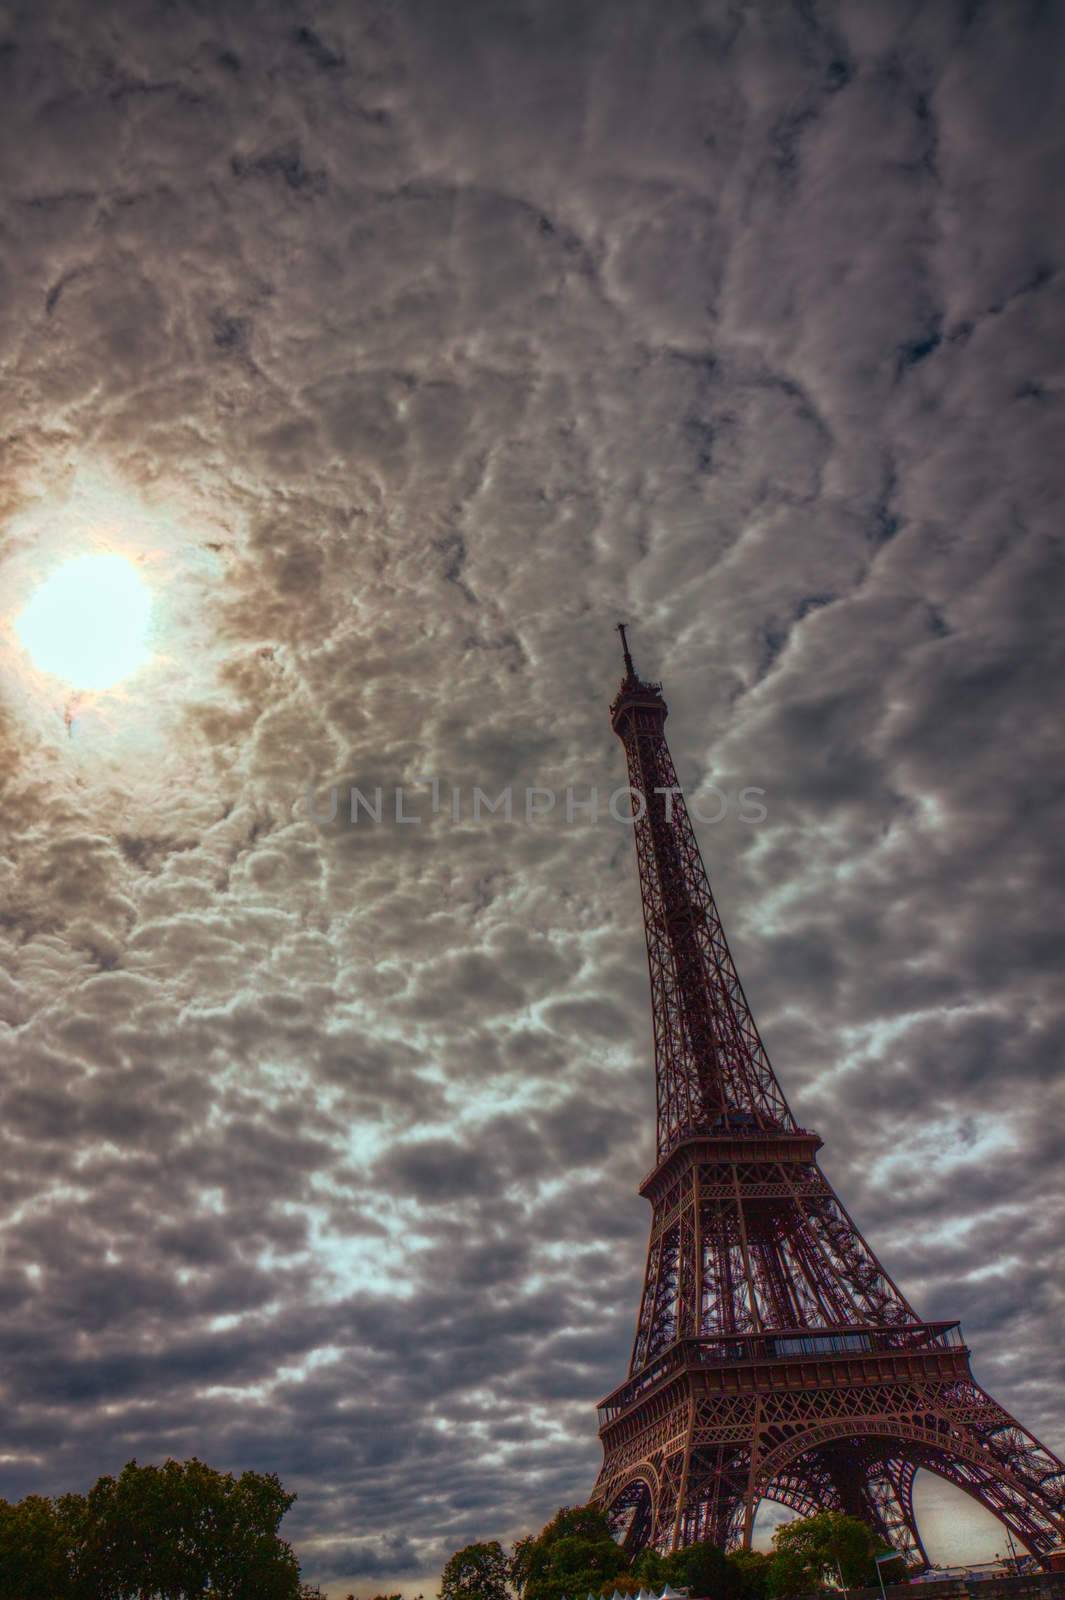 Clouds over Eiffel Tower by Harvepino